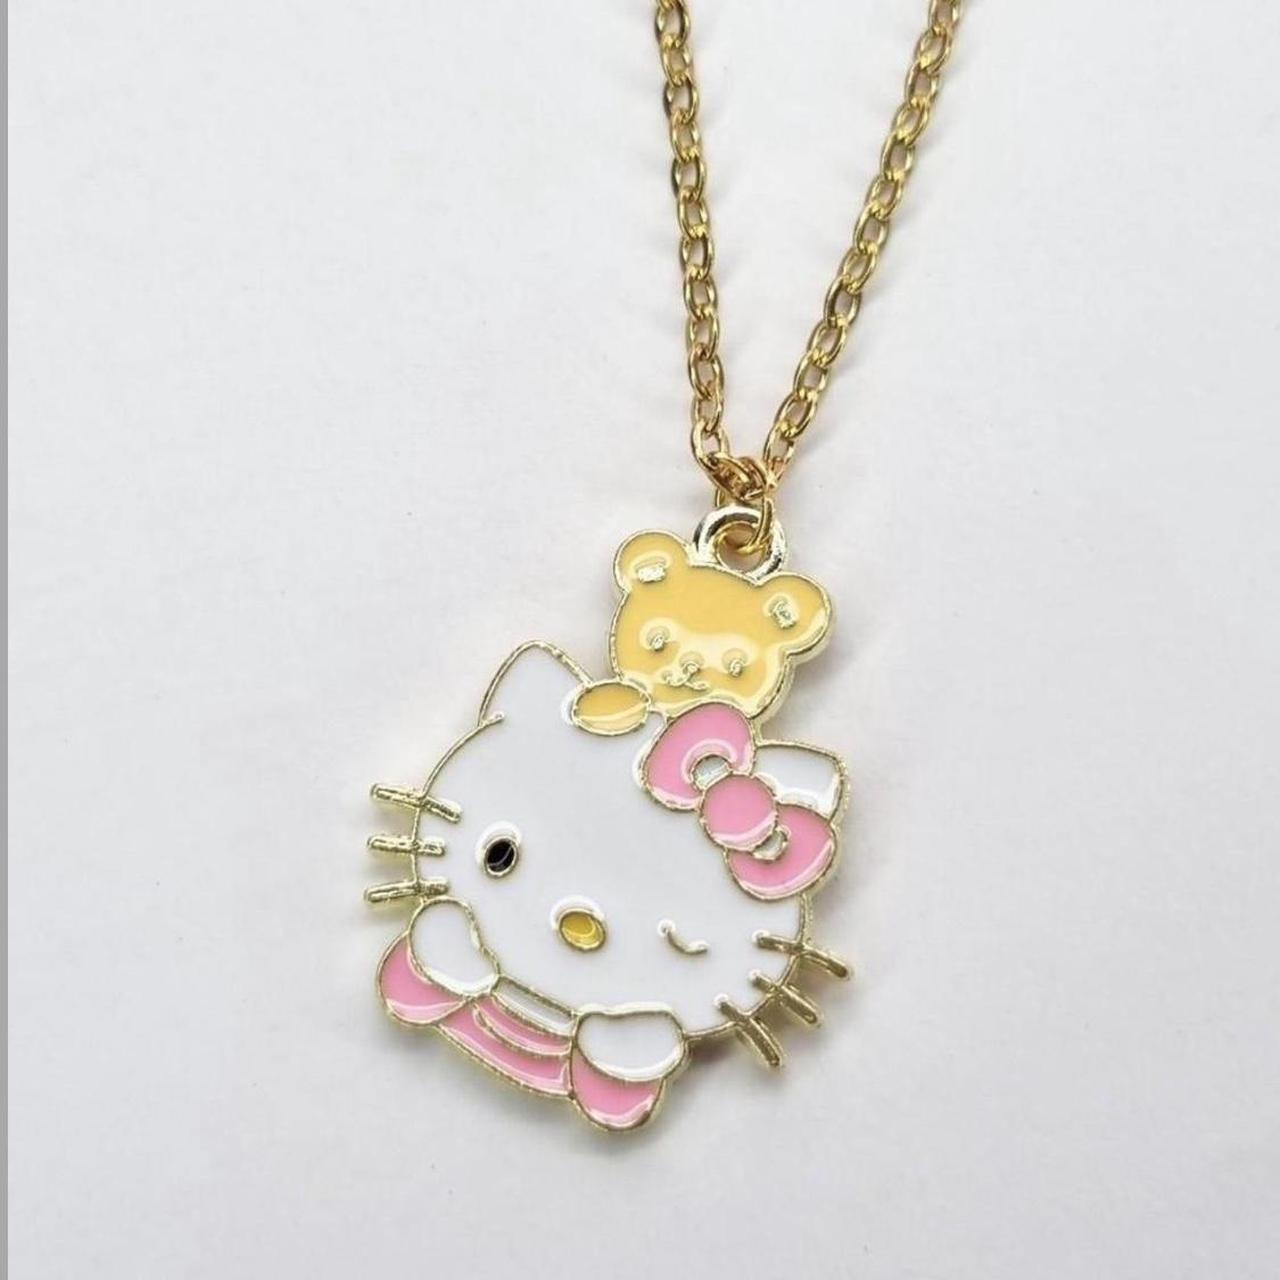 Gold Hello Kitty Charm Pendant On A Gold Necklace Chain!!